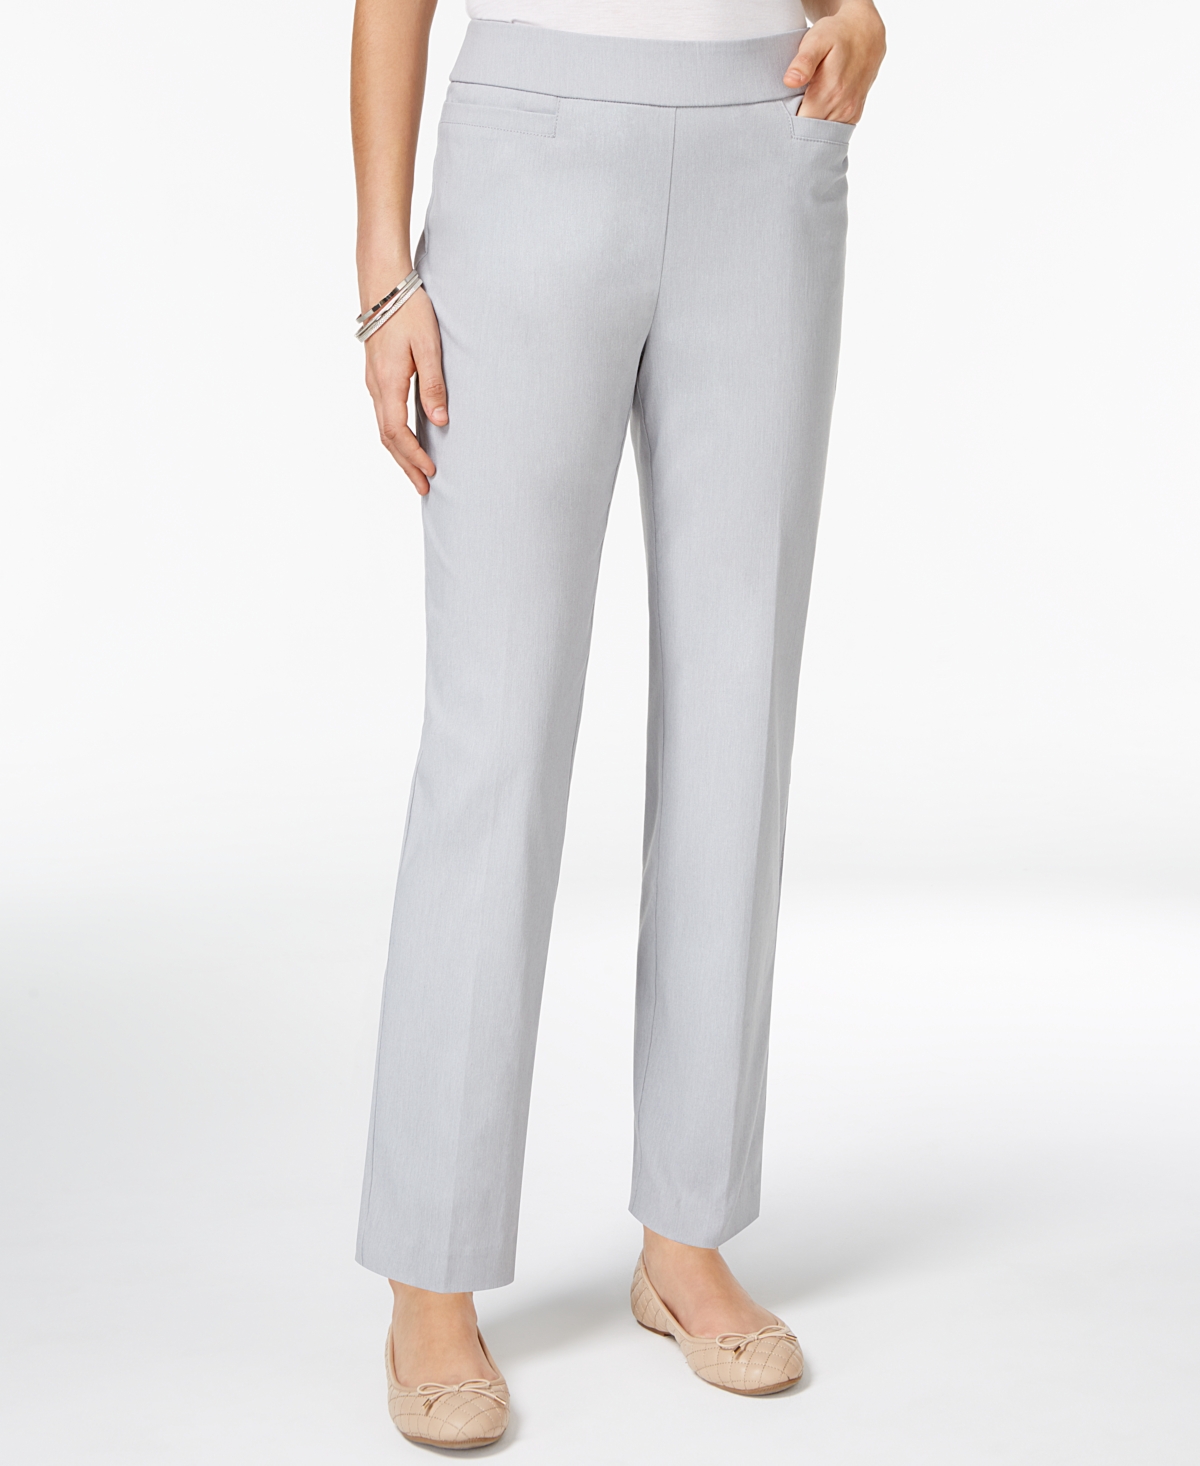 Alfred Dunner Petite Classics Tummy-control Pull-on Straight-leg Pants, Petite & Petite Short In Grey